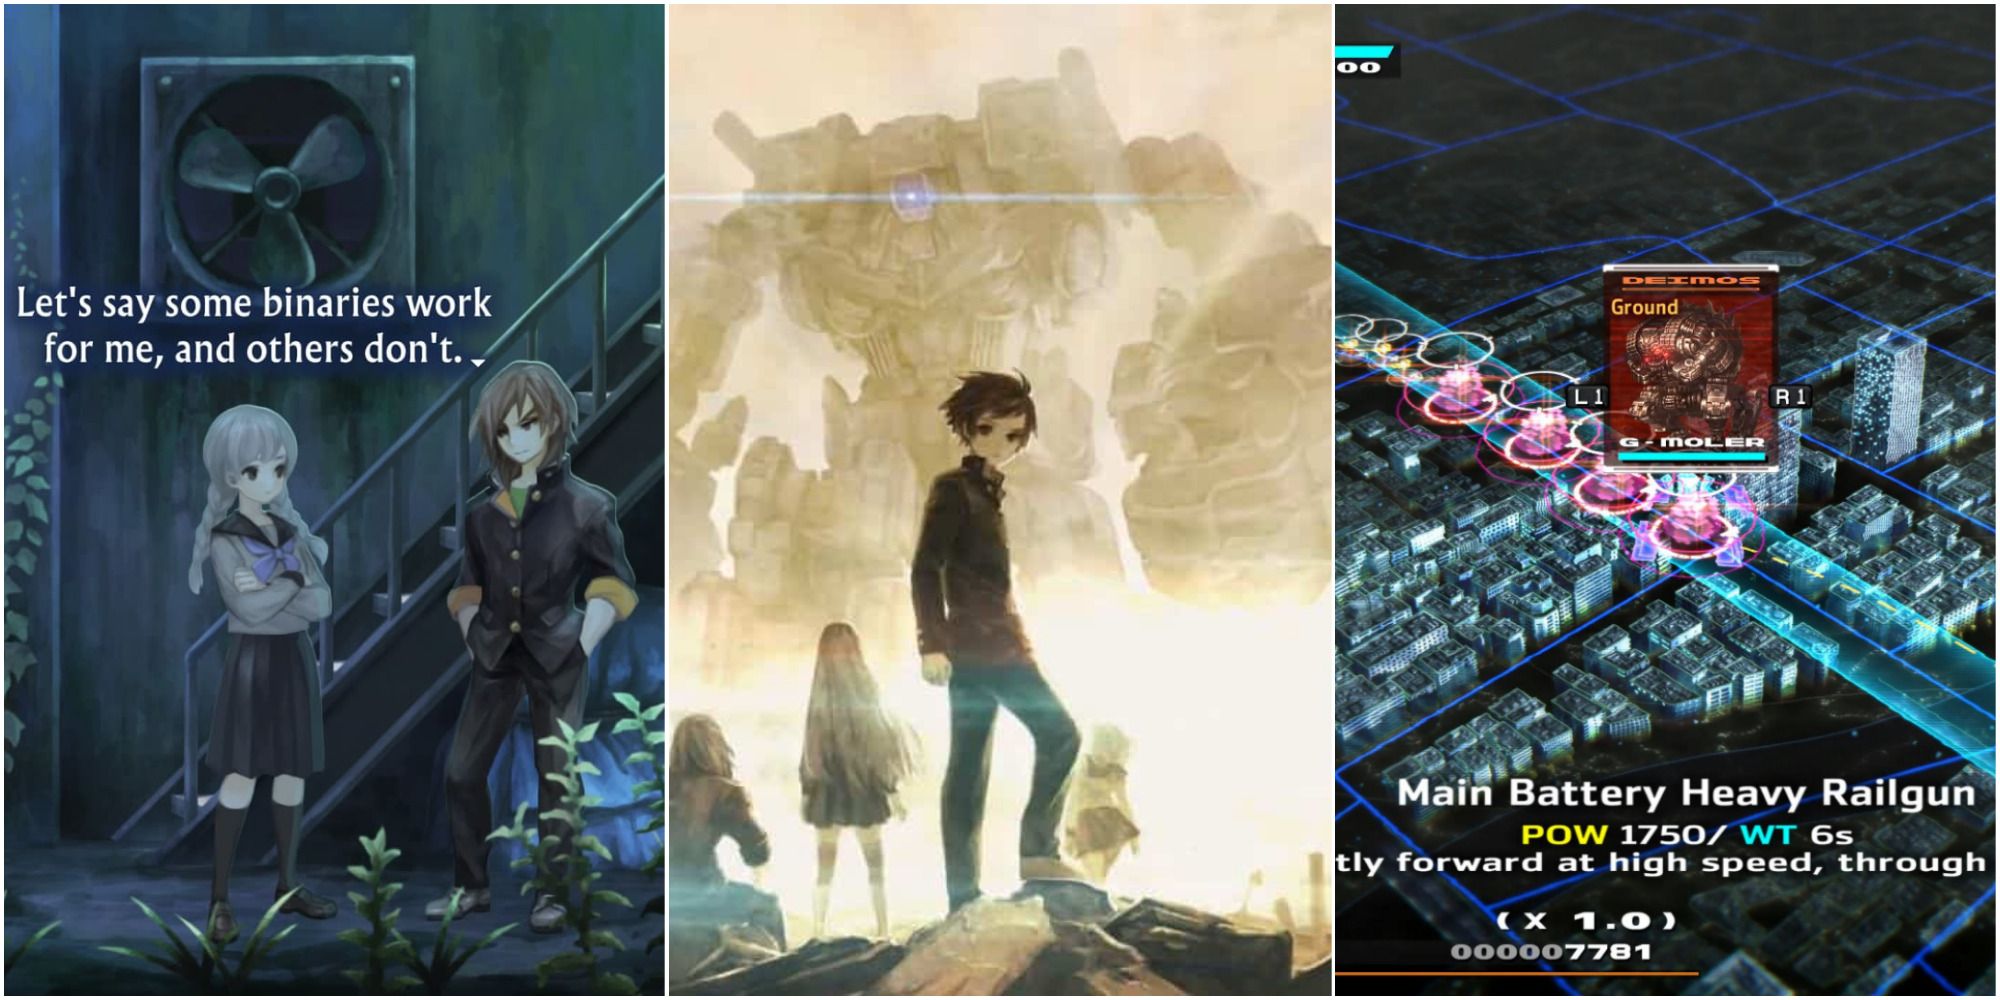 A collage of images from 13 Sentinels: Aegis Rim